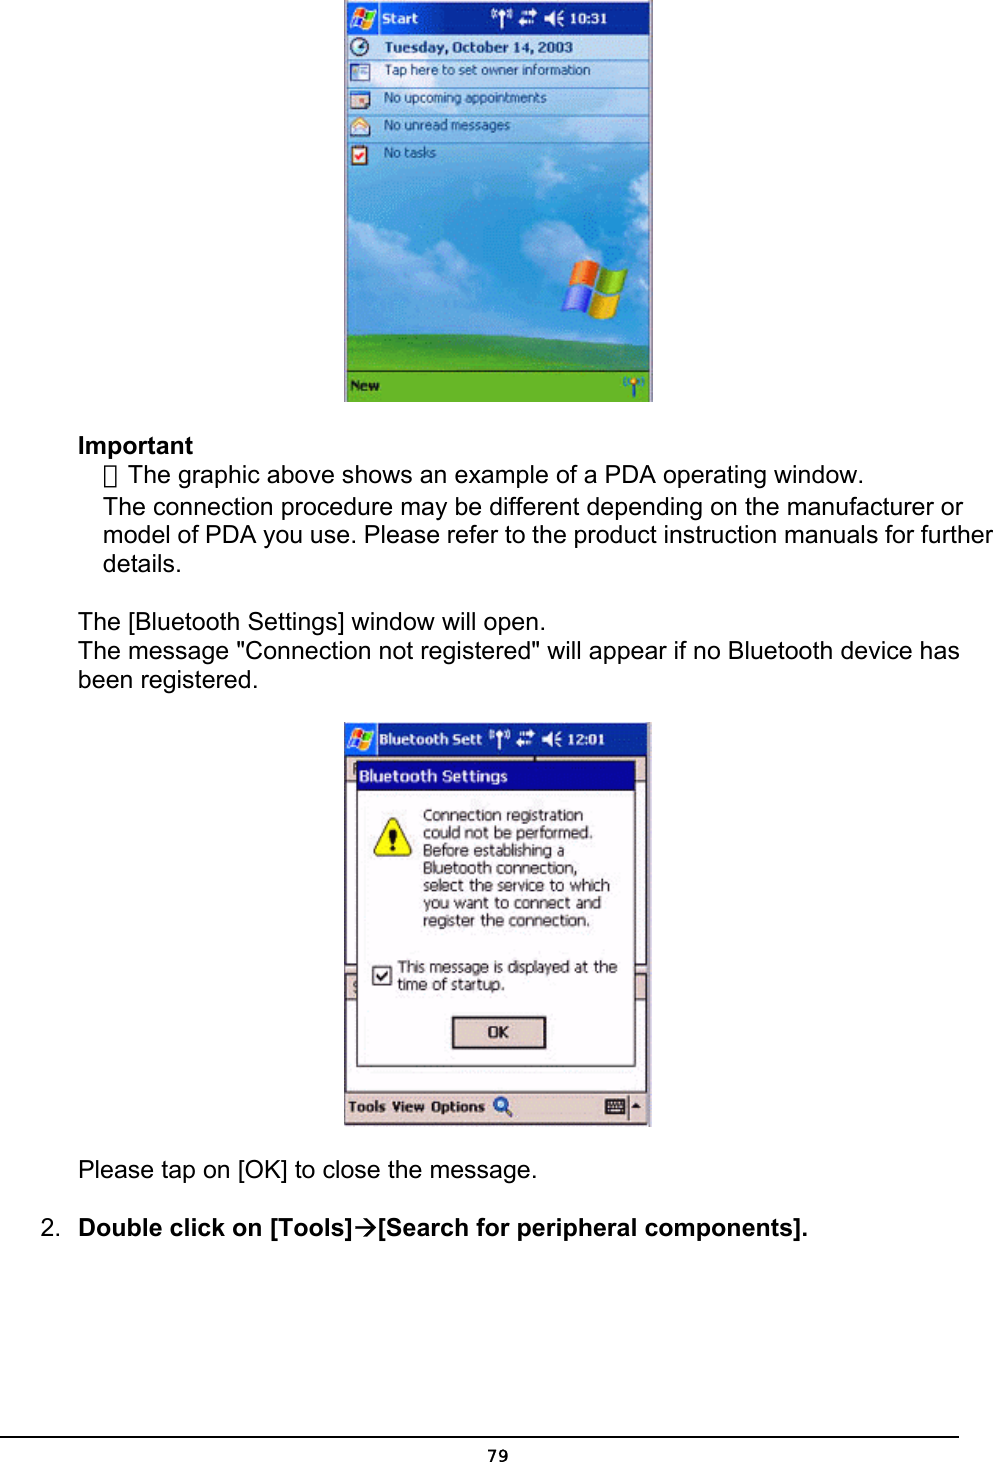   Important ．The graphic above shows an example of a PDA operating window. The connection procedure may be different depending on the manufacturer or model of PDA you use. Please refer to the product instruction manuals for further details.   The [Bluetooth Settings] window will open. The message &quot;Connection not registered&quot; will appear if no Bluetooth device has been registered.  Please tap on [OK] to close the message. 2.  Double click on [Tools]Æ[Search for peripheral components].  79